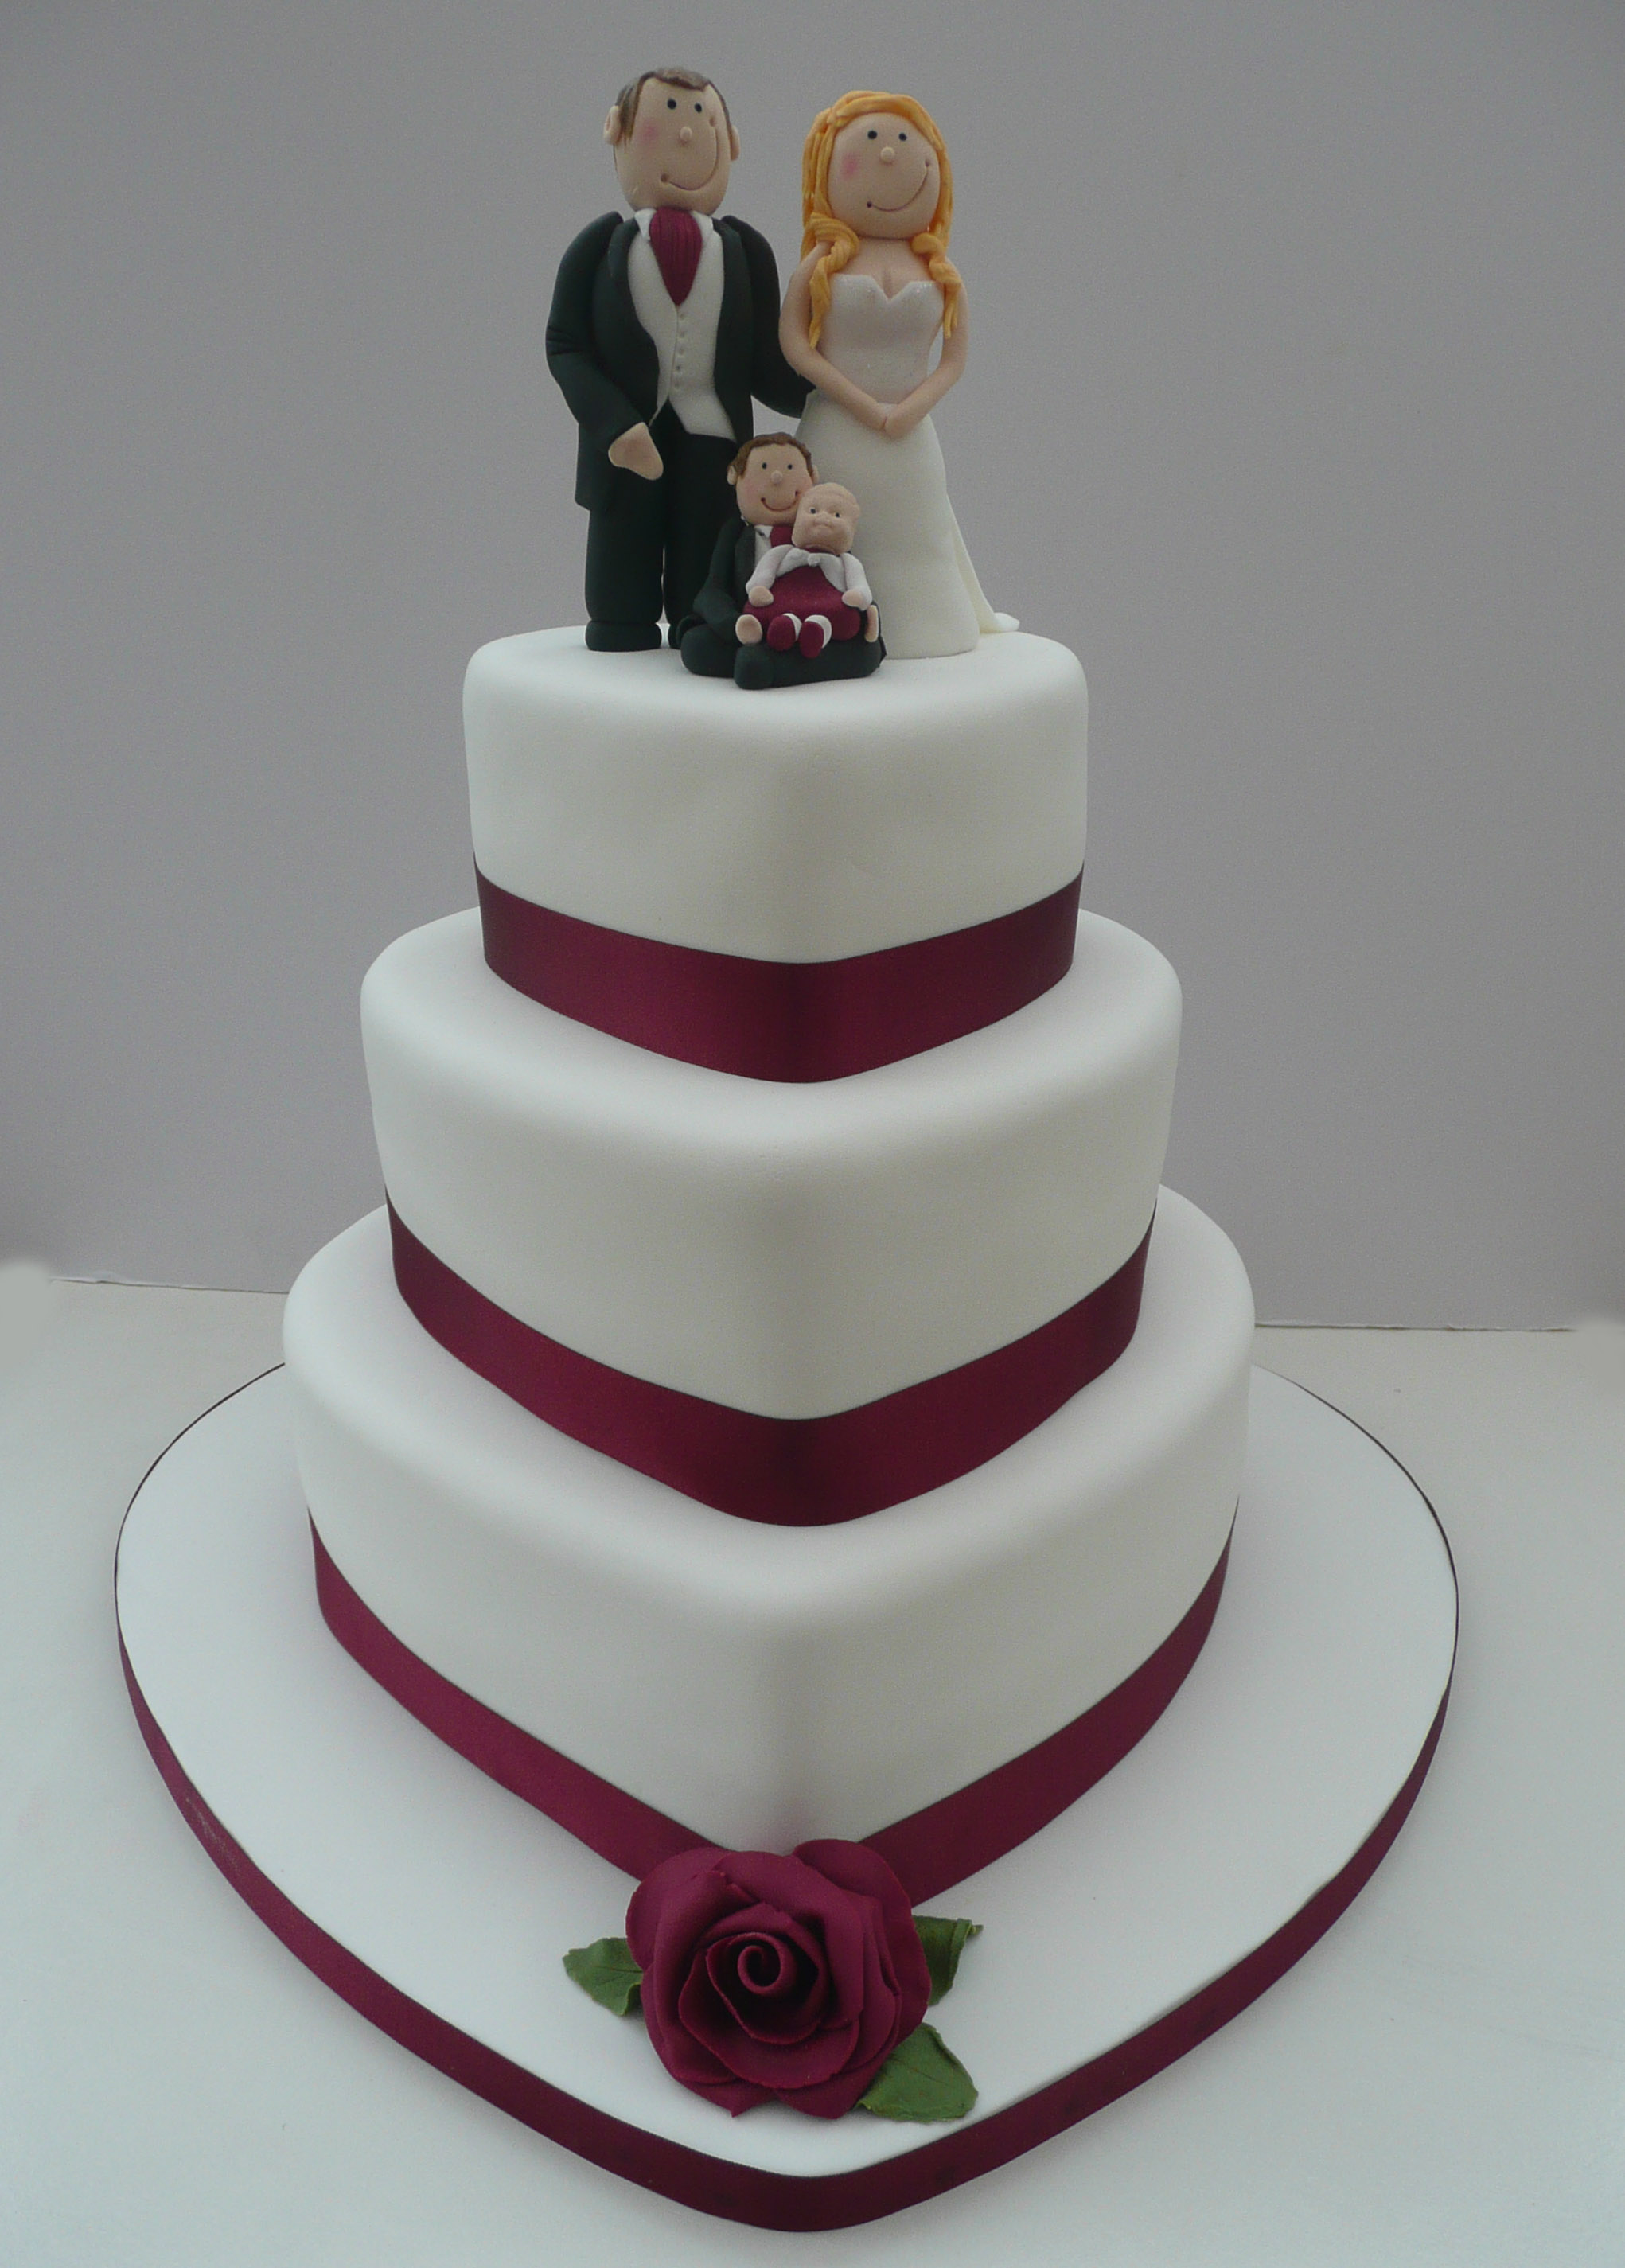 Heart Shaped Wedding Cakes Designs